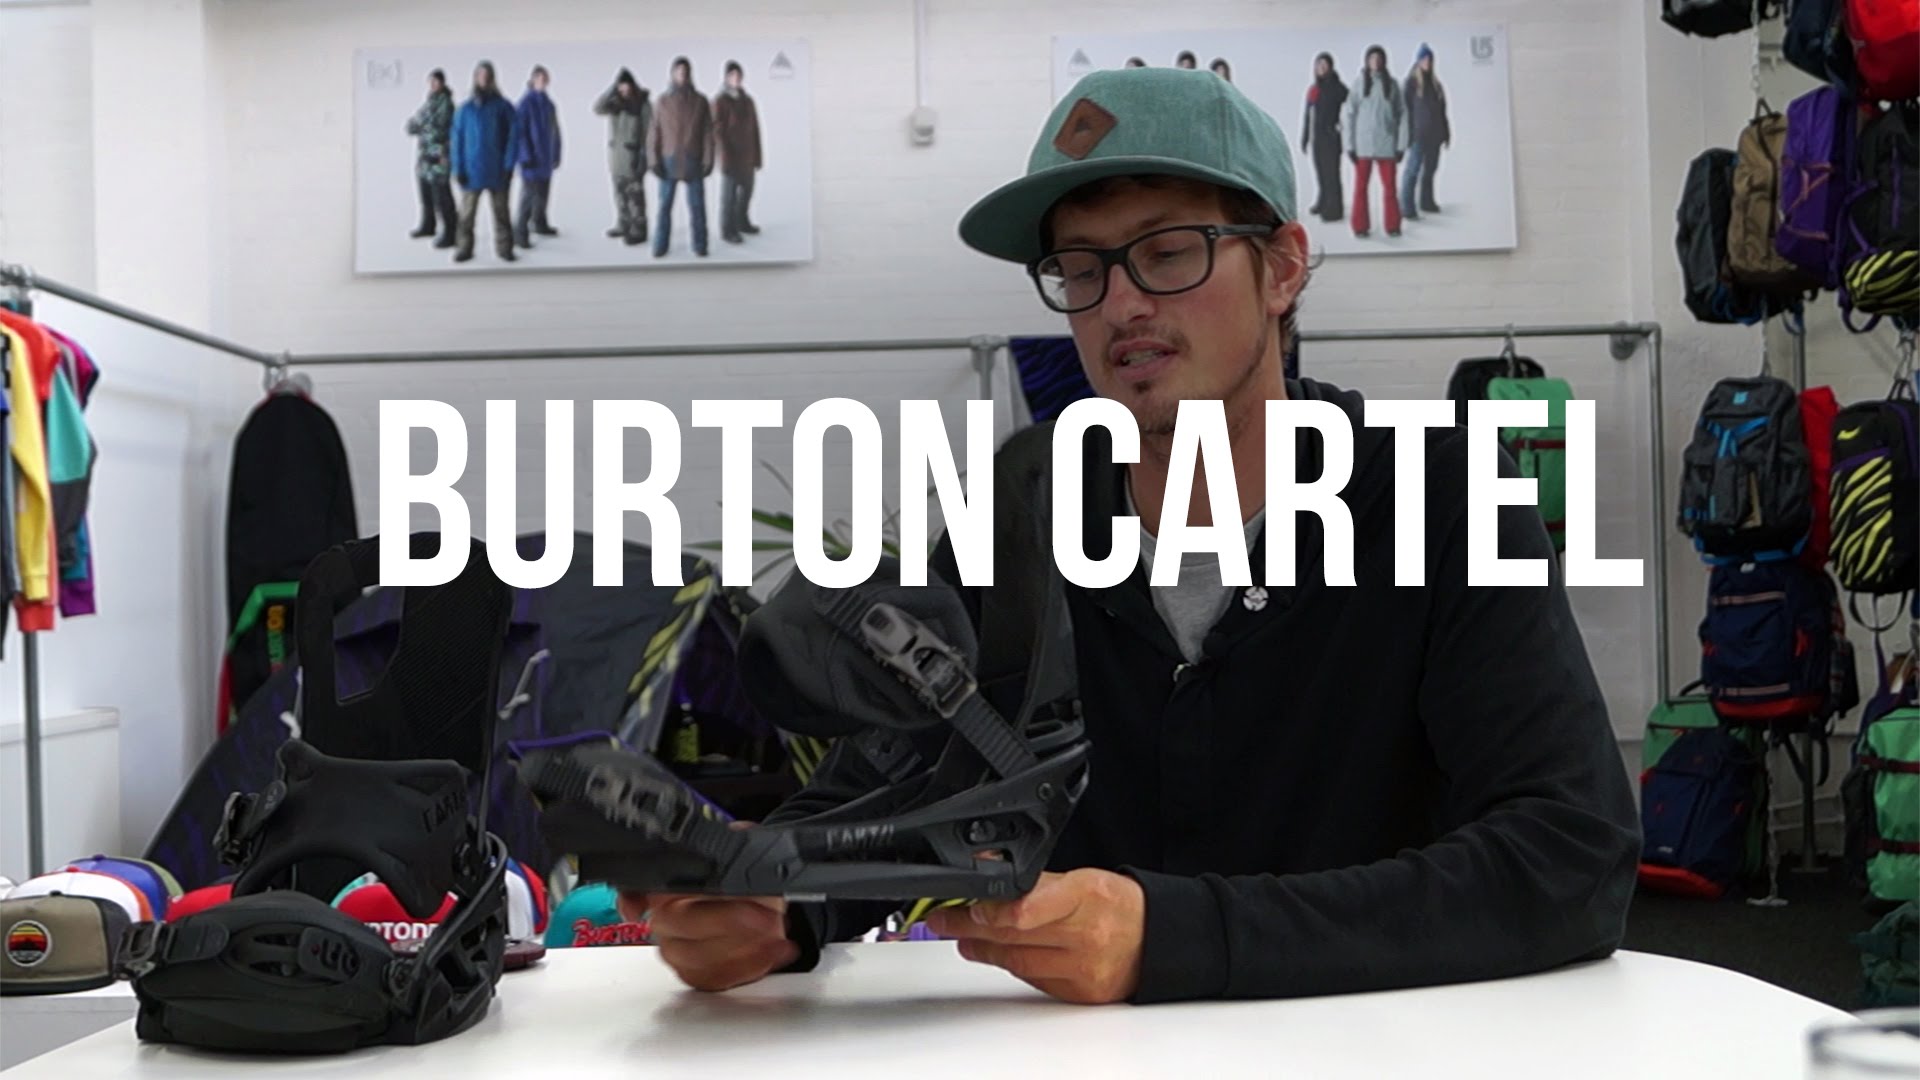 Burton Cartel 2015 Snowboard Binding Review By Adam At Bliss Snowboards